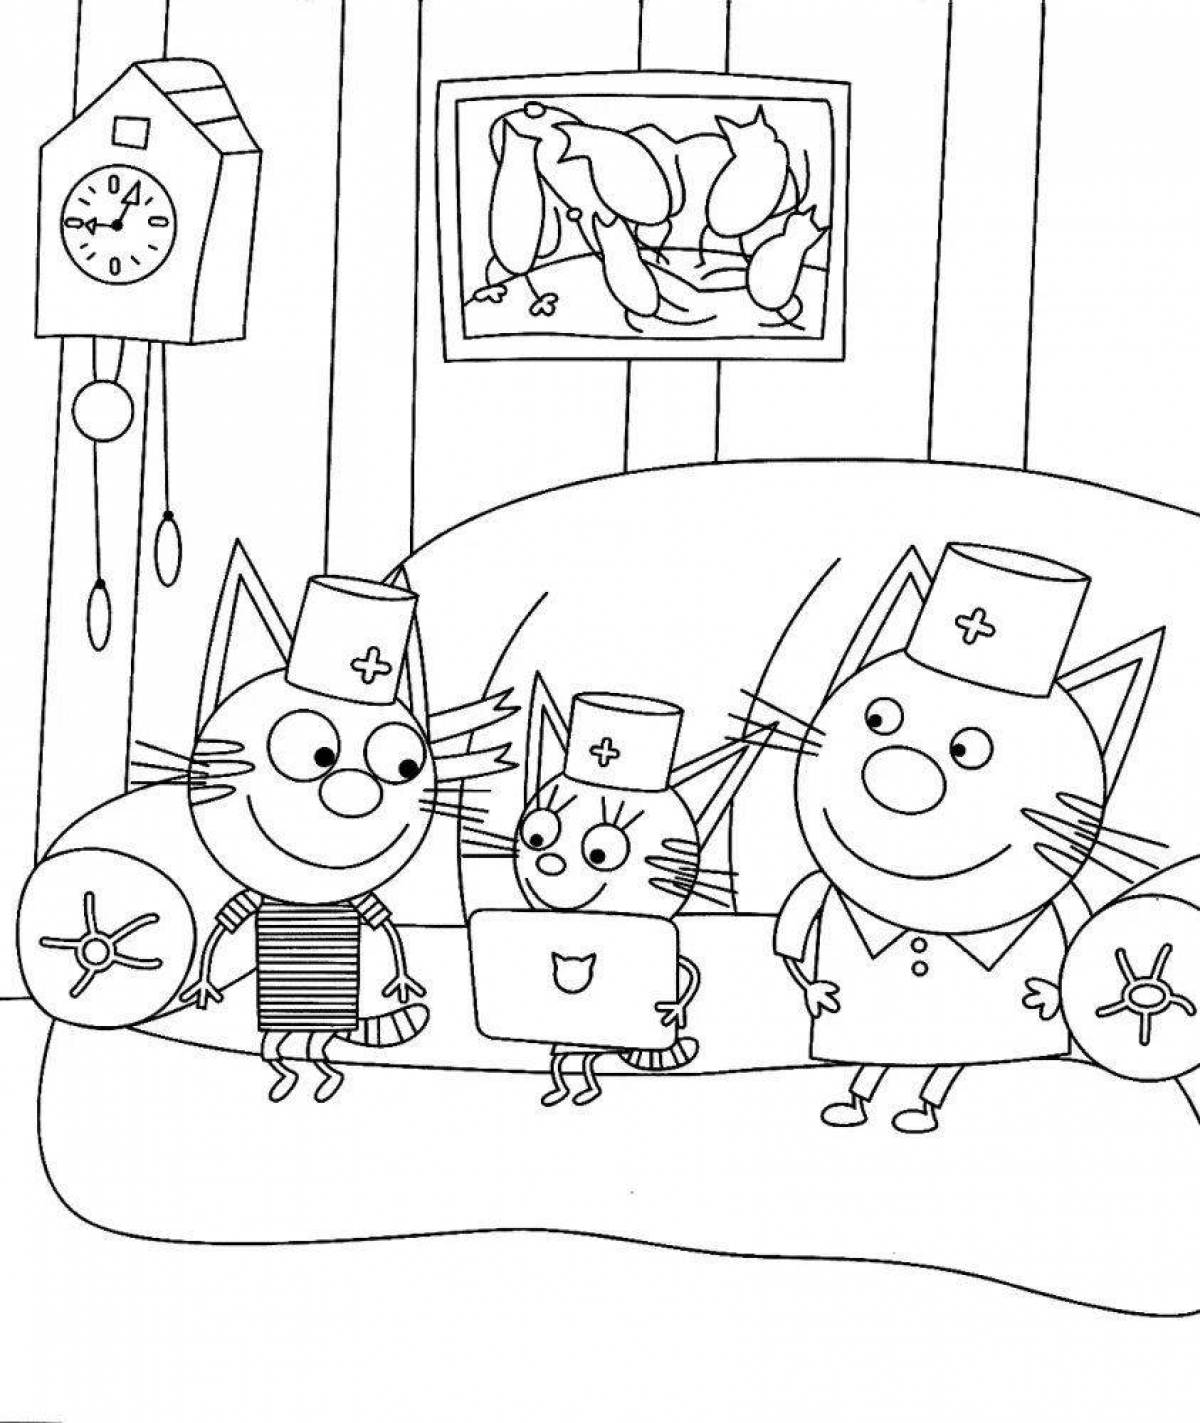 Charming coloring 3 cats